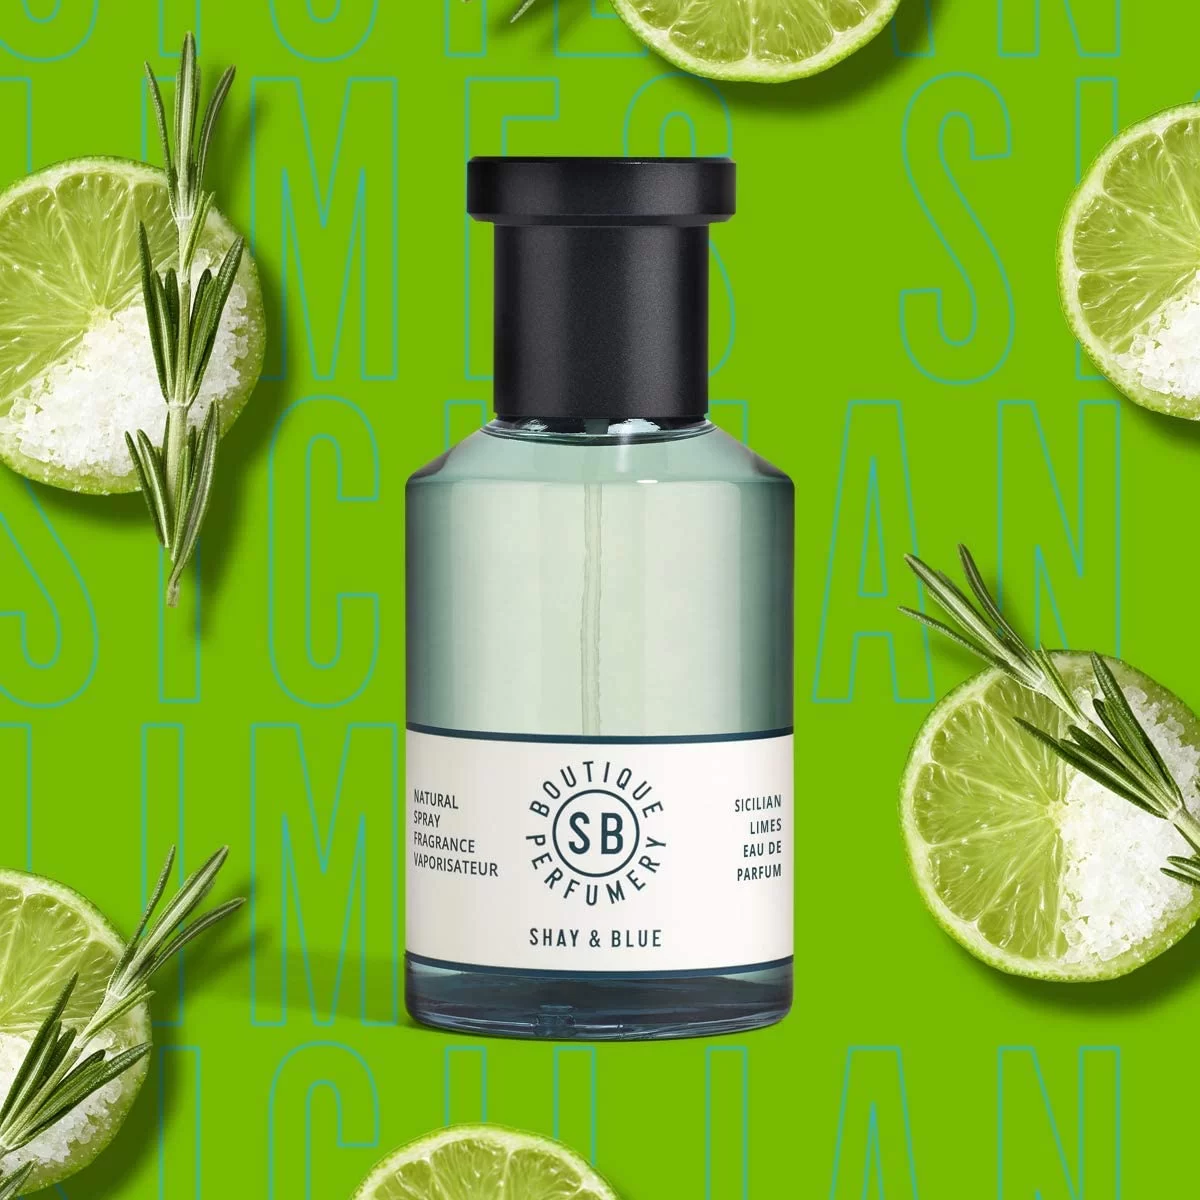 Best Lime Perfumes
Shay & Blue London Sicilian Limes